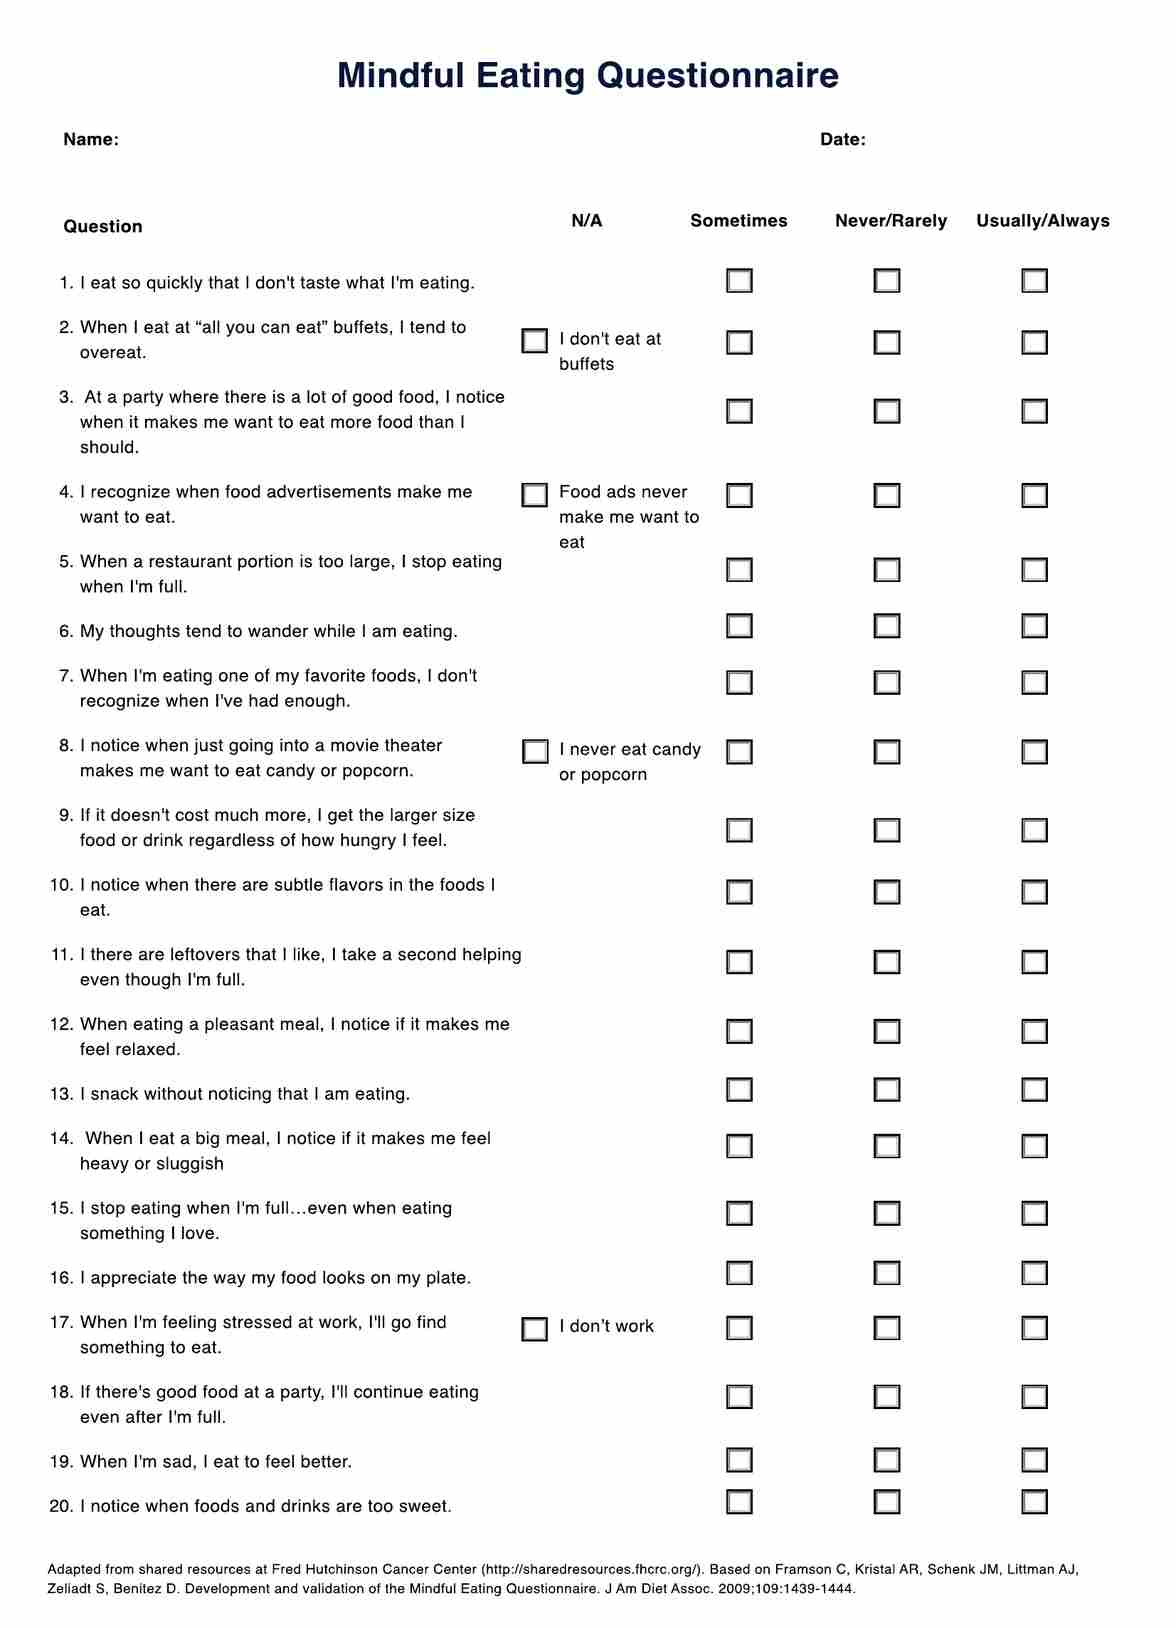 Mindful Eating Questionnaire PDF Example